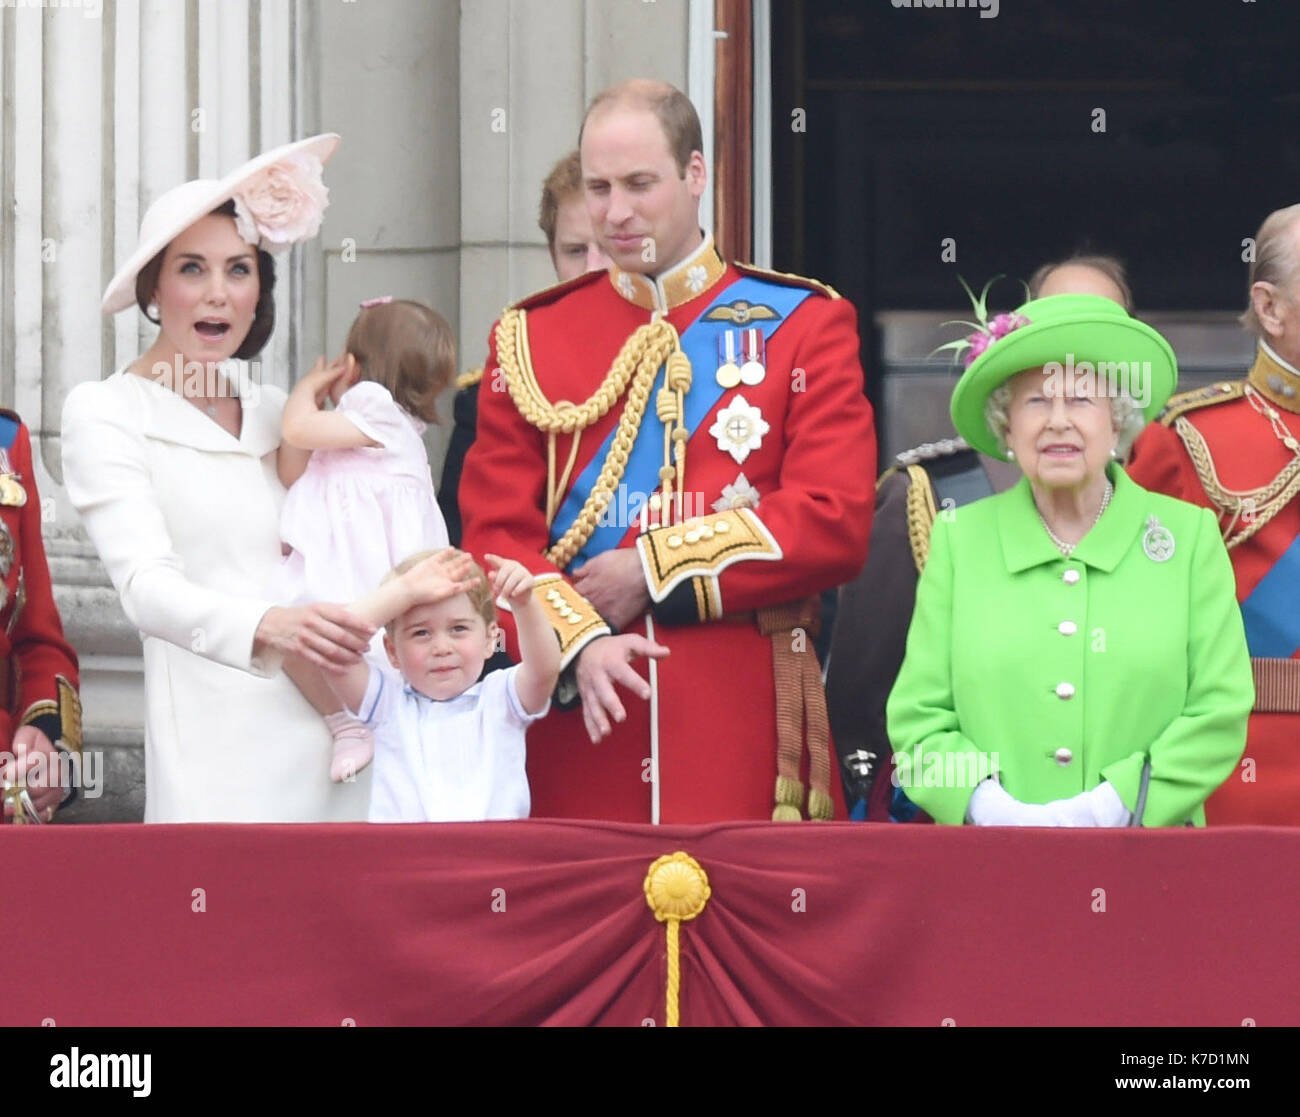 Photo Must Be Credited ©Alpha Press 079965 11/06/2016 Kate Duchess of Cambridge Katherine Catherine Middleton Princess Charlotte and Prince George with Prince William Duke Of Cambridge and Queen Elizabeth II    in London for Trooping the Colour 2016 during The Queen's 90th Birthday Celebrations. Stock Photo